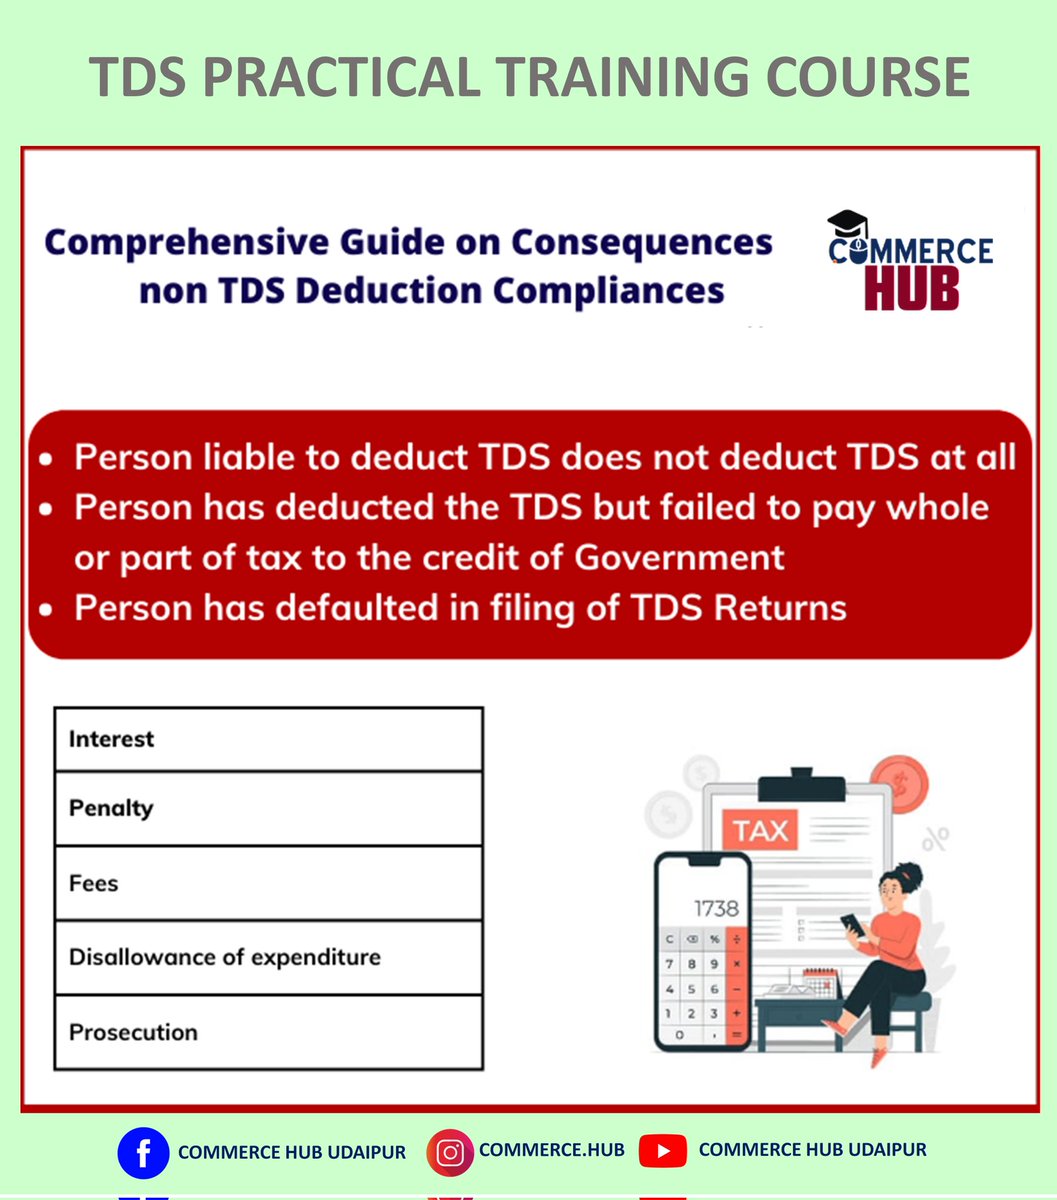 E-TDS Training Course #Learn #TDSCompliances 

#TDSDeduction #TDSPayment #TDSFiling 

#Form16 #Form16A #26AS #TCS

#CareerGrowth #CommerceHub #Udaipur